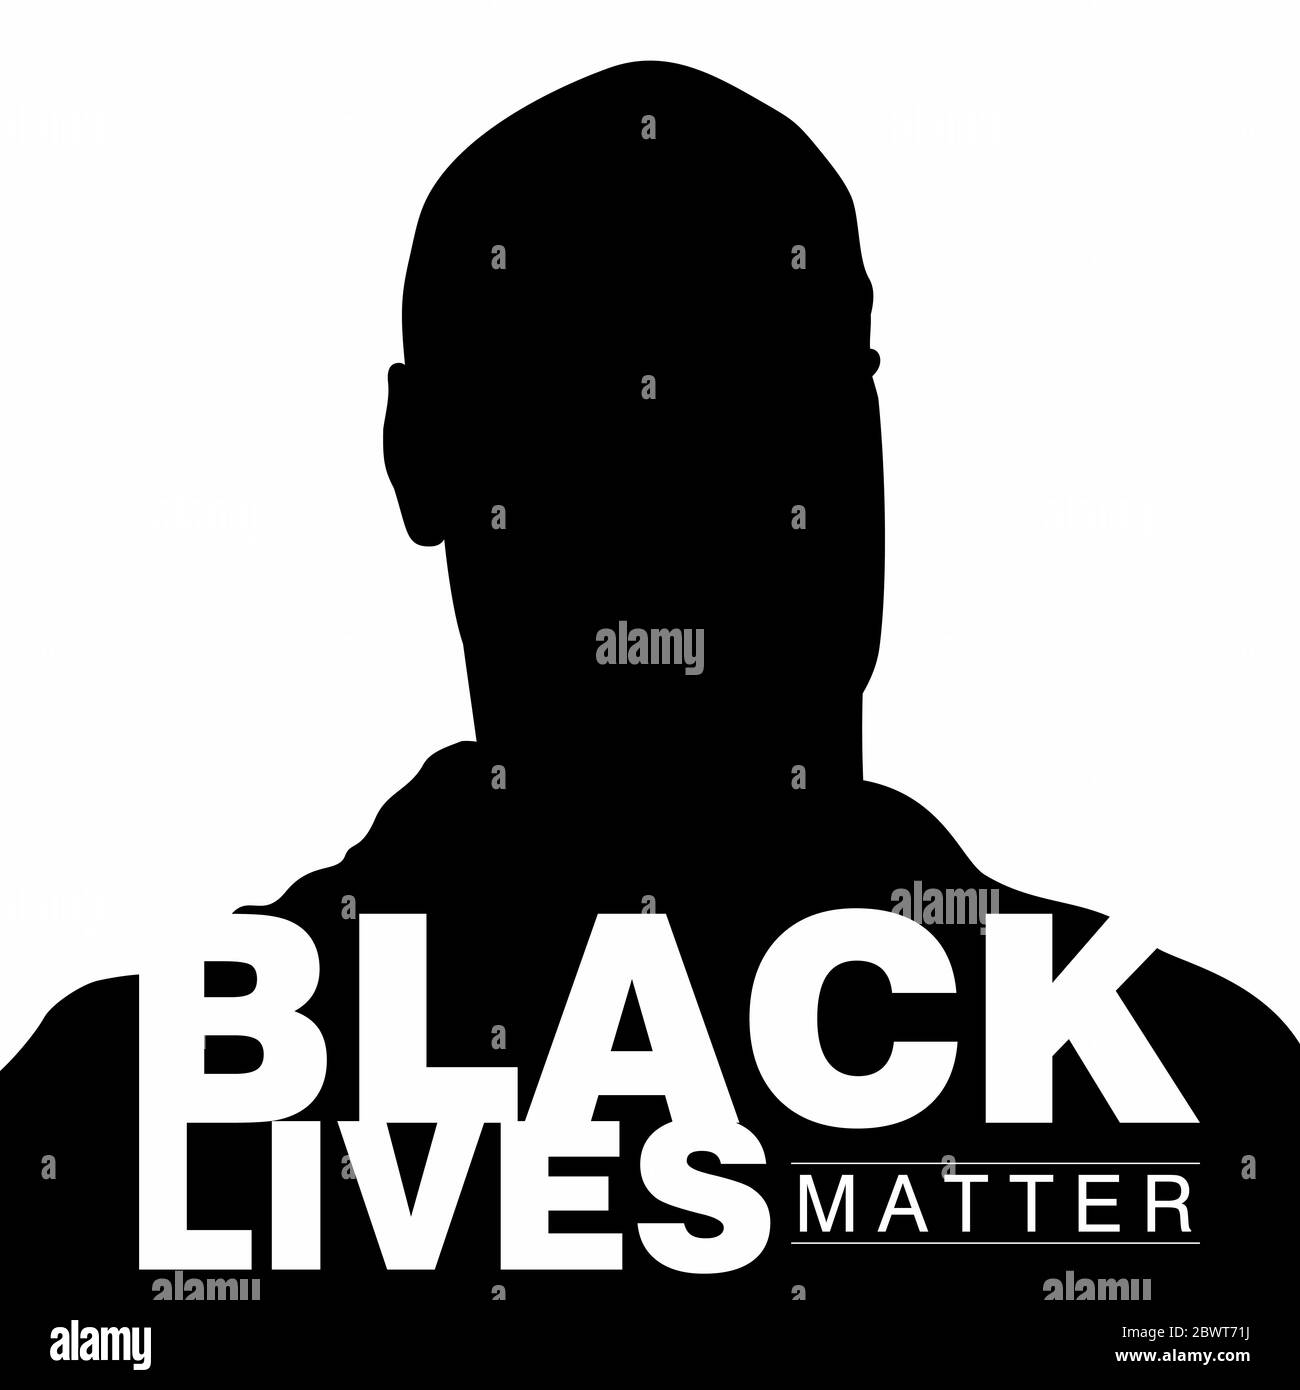 Vector silhouette illustration of a black man with a caption Black Lives Matter on the foreground Stock Vector